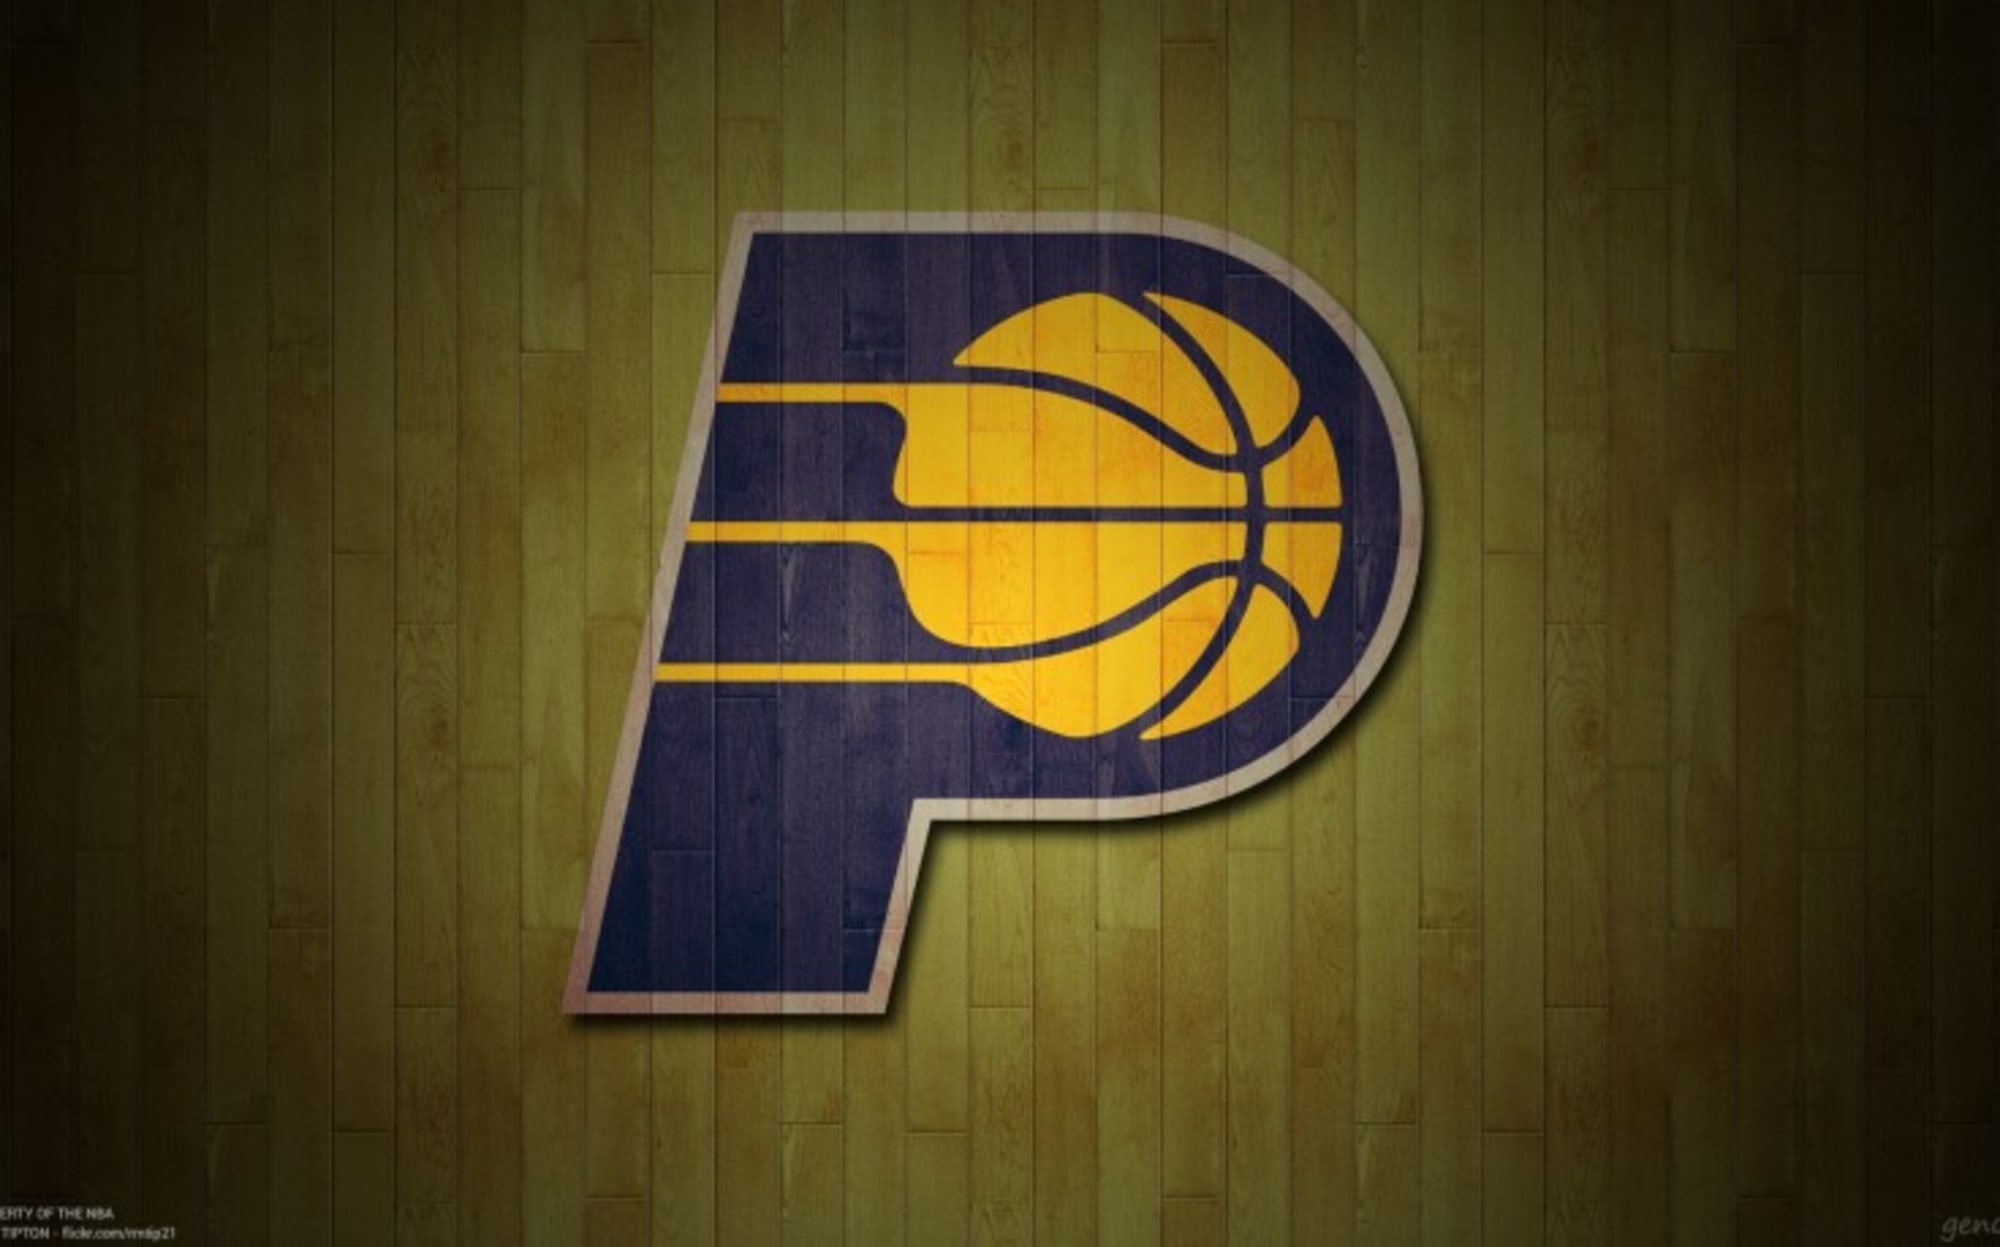 Where Does the Indiana Pacers Logo Rank in the NBA?